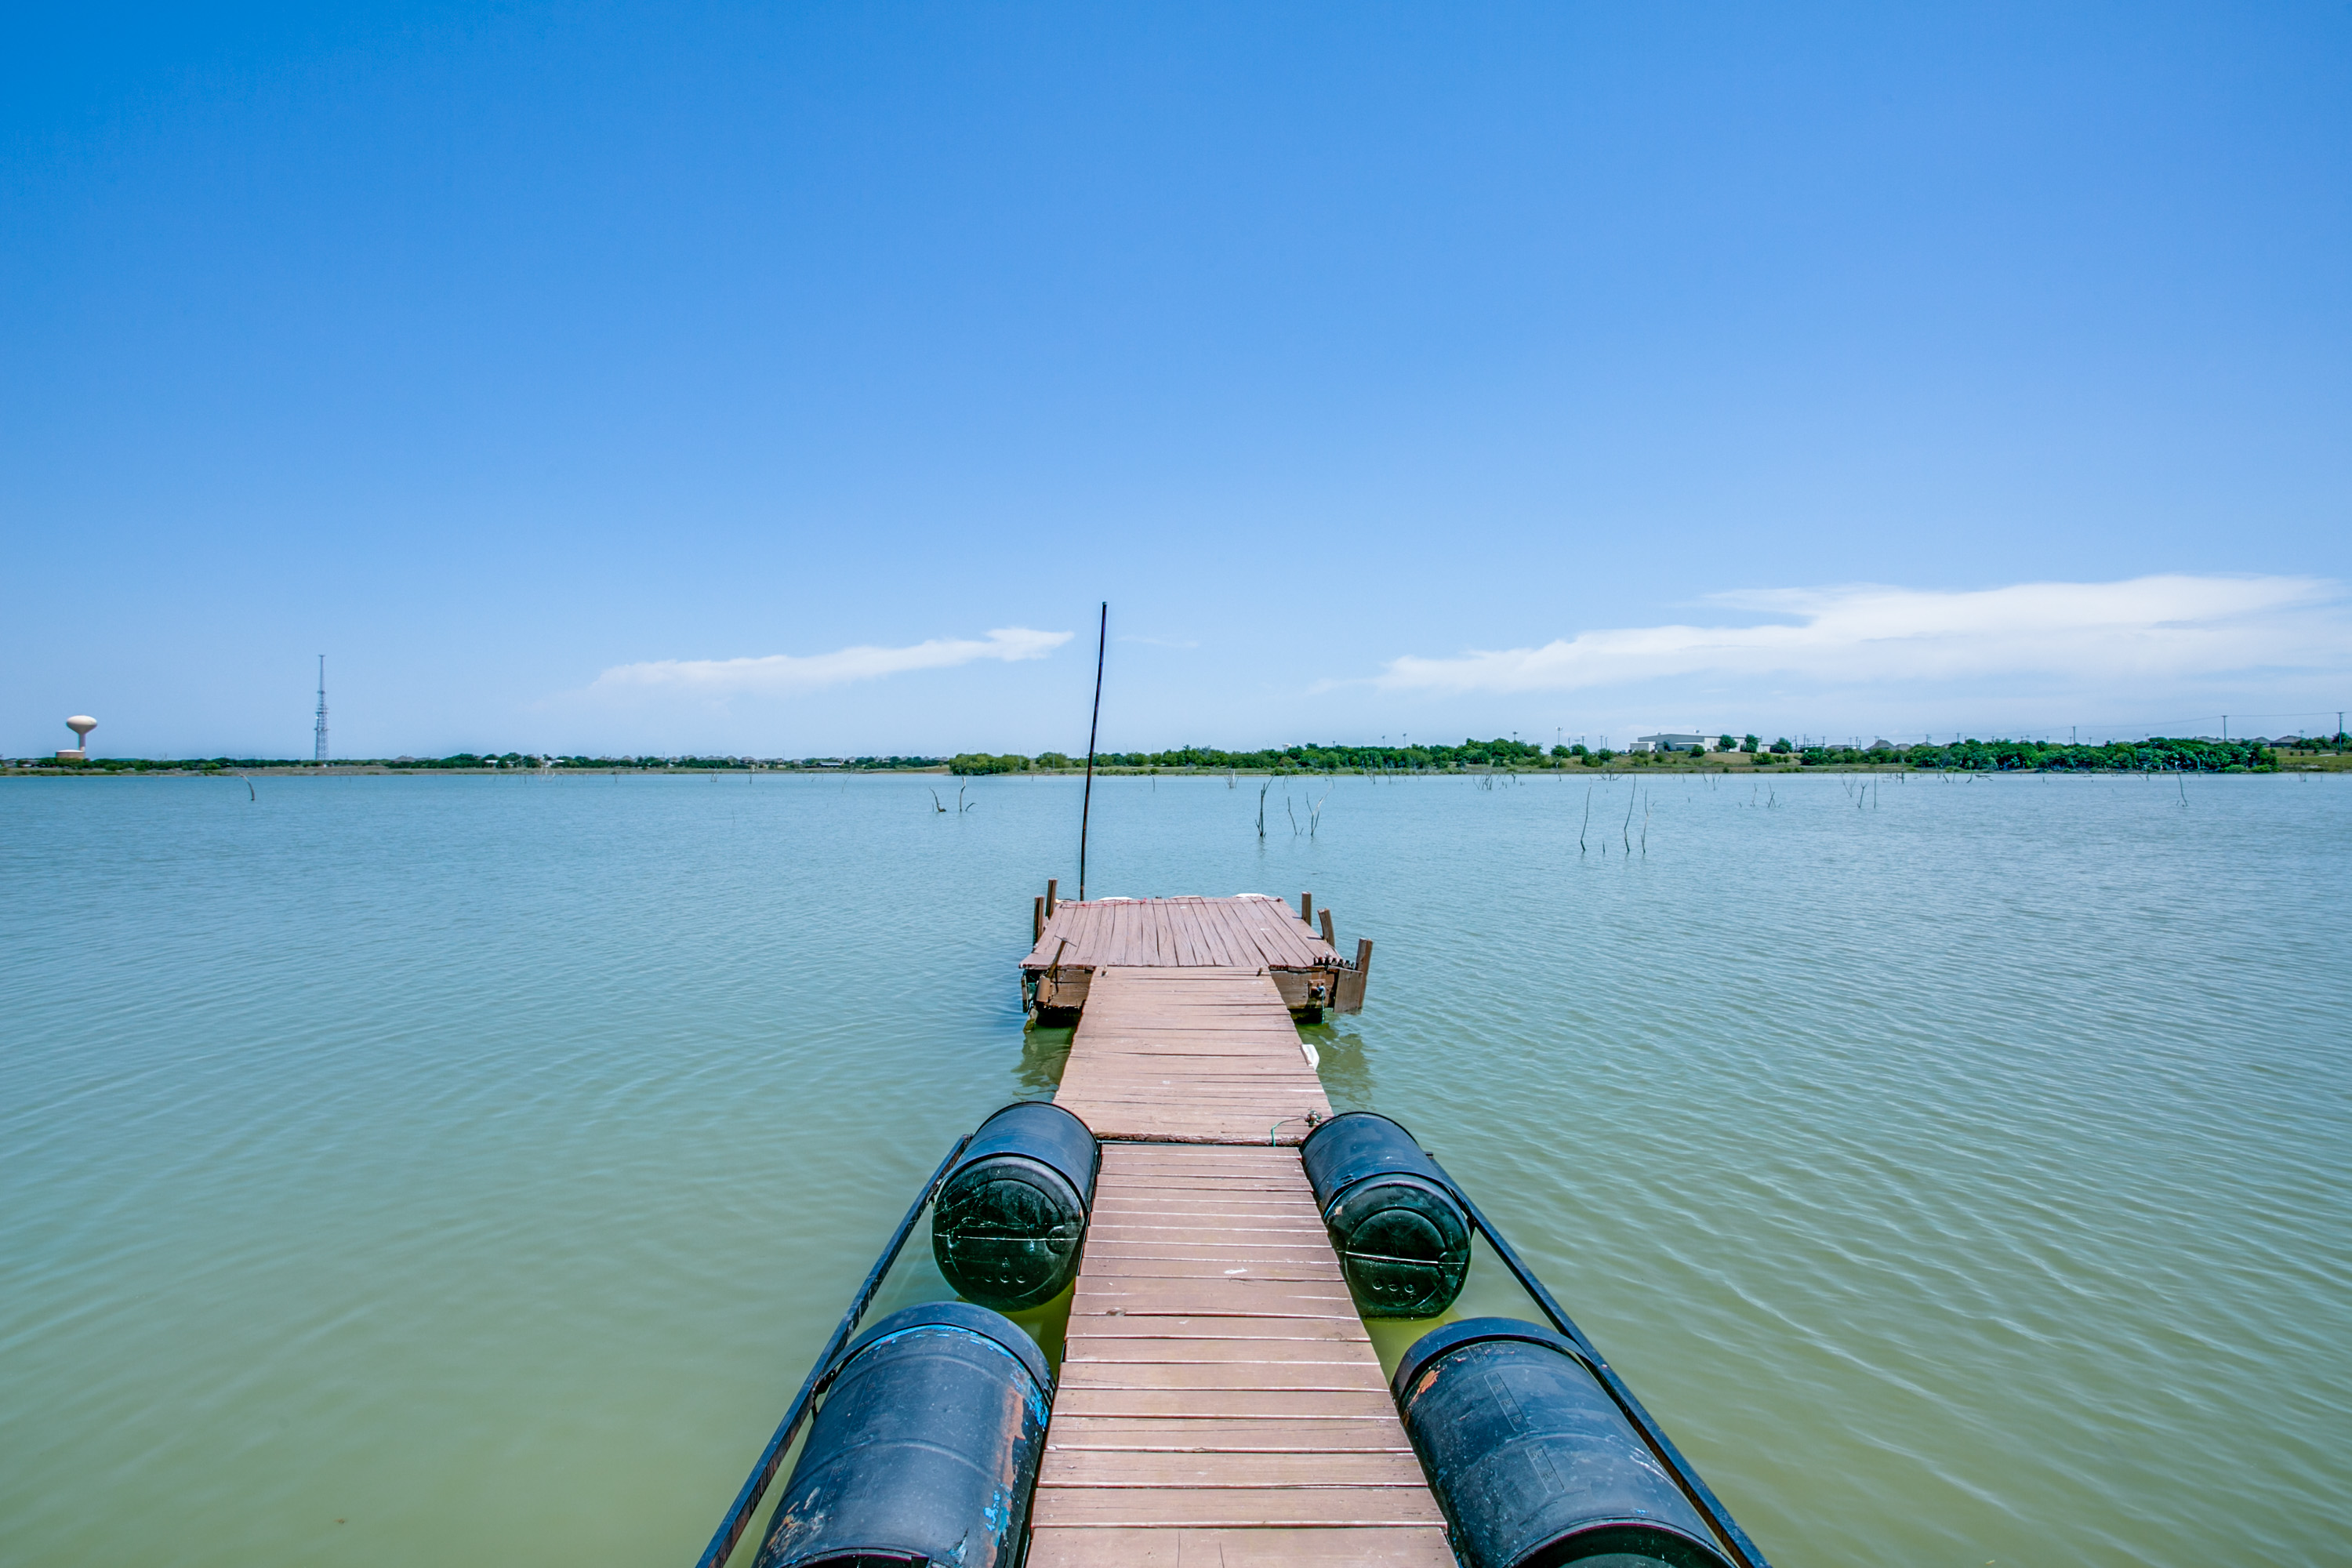 Dock your boat for lunch, catch fish as they're biting & do back flips off the dock!  Whether it's relaxing or fun you're after, enjoy from your own backyard!